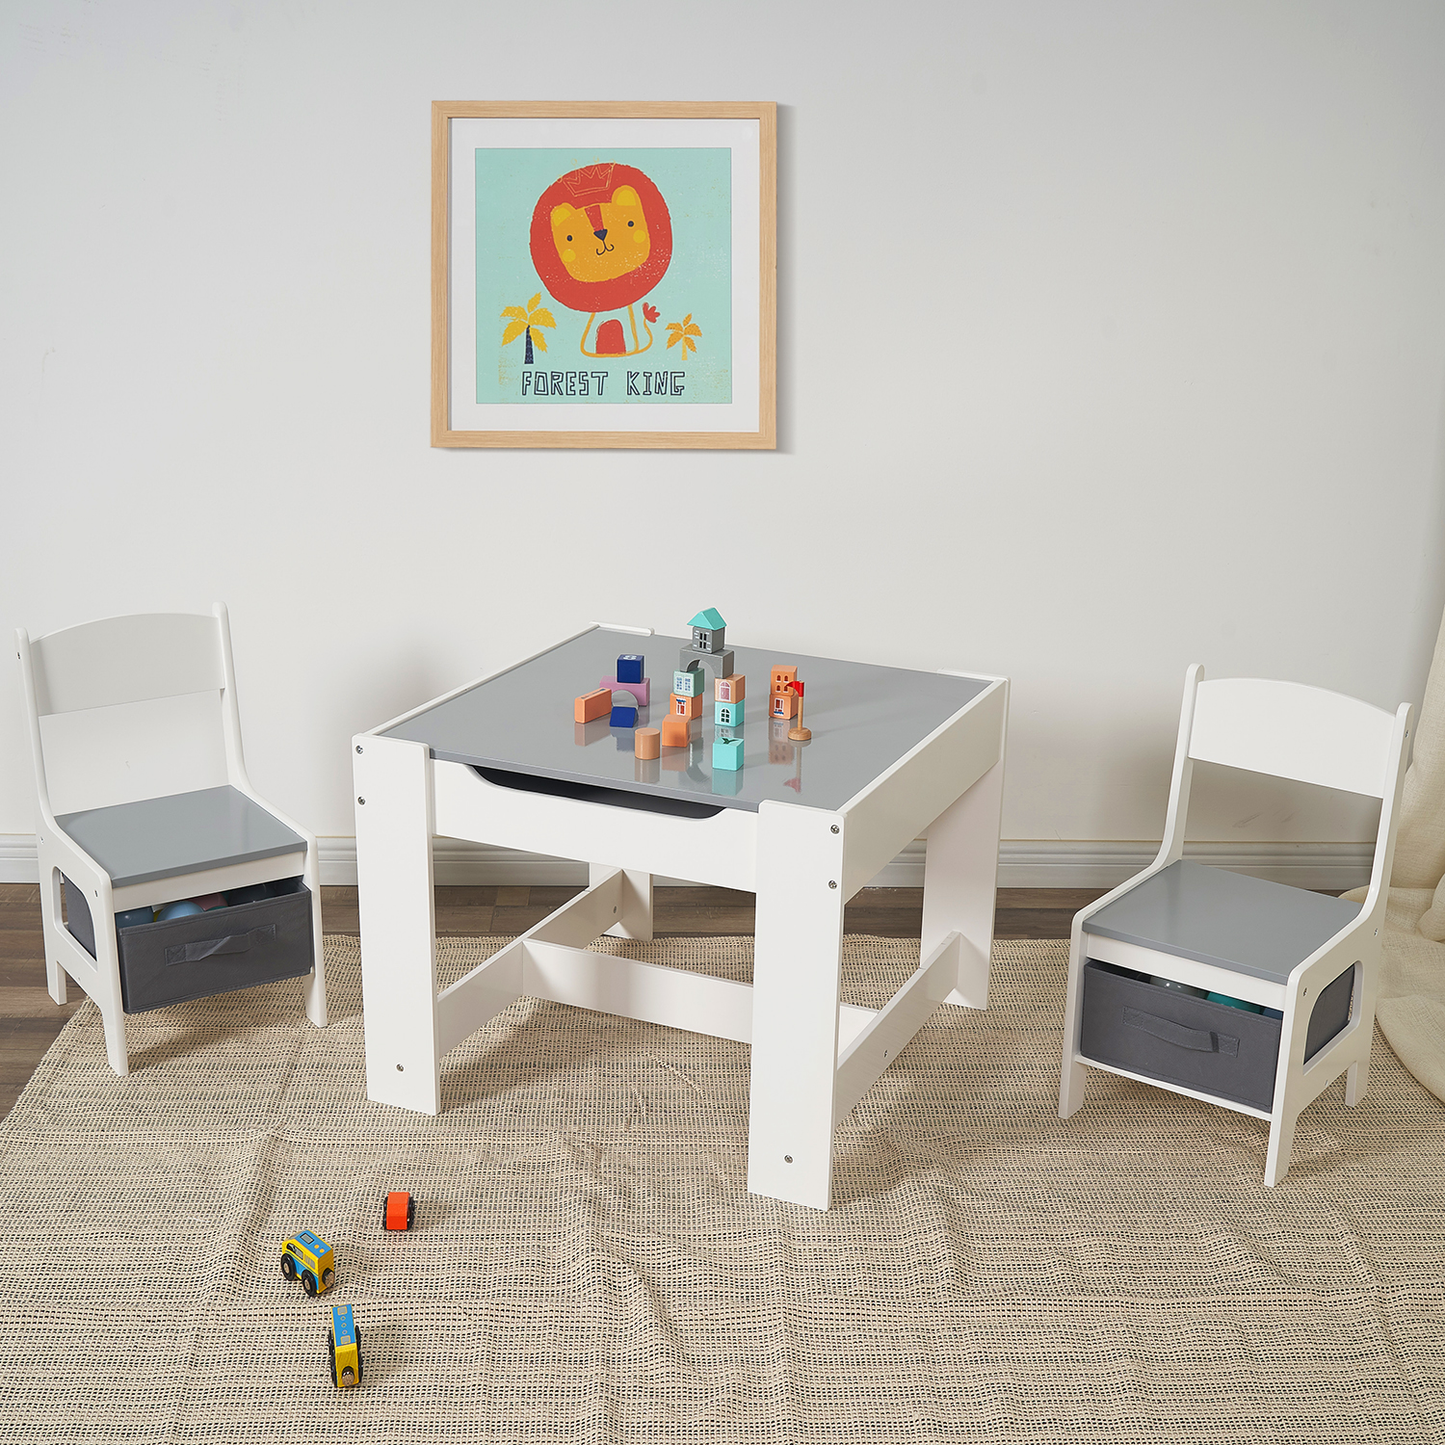 Children's wooden table with chairs, double-sided, 2 in 1 - for play and storage